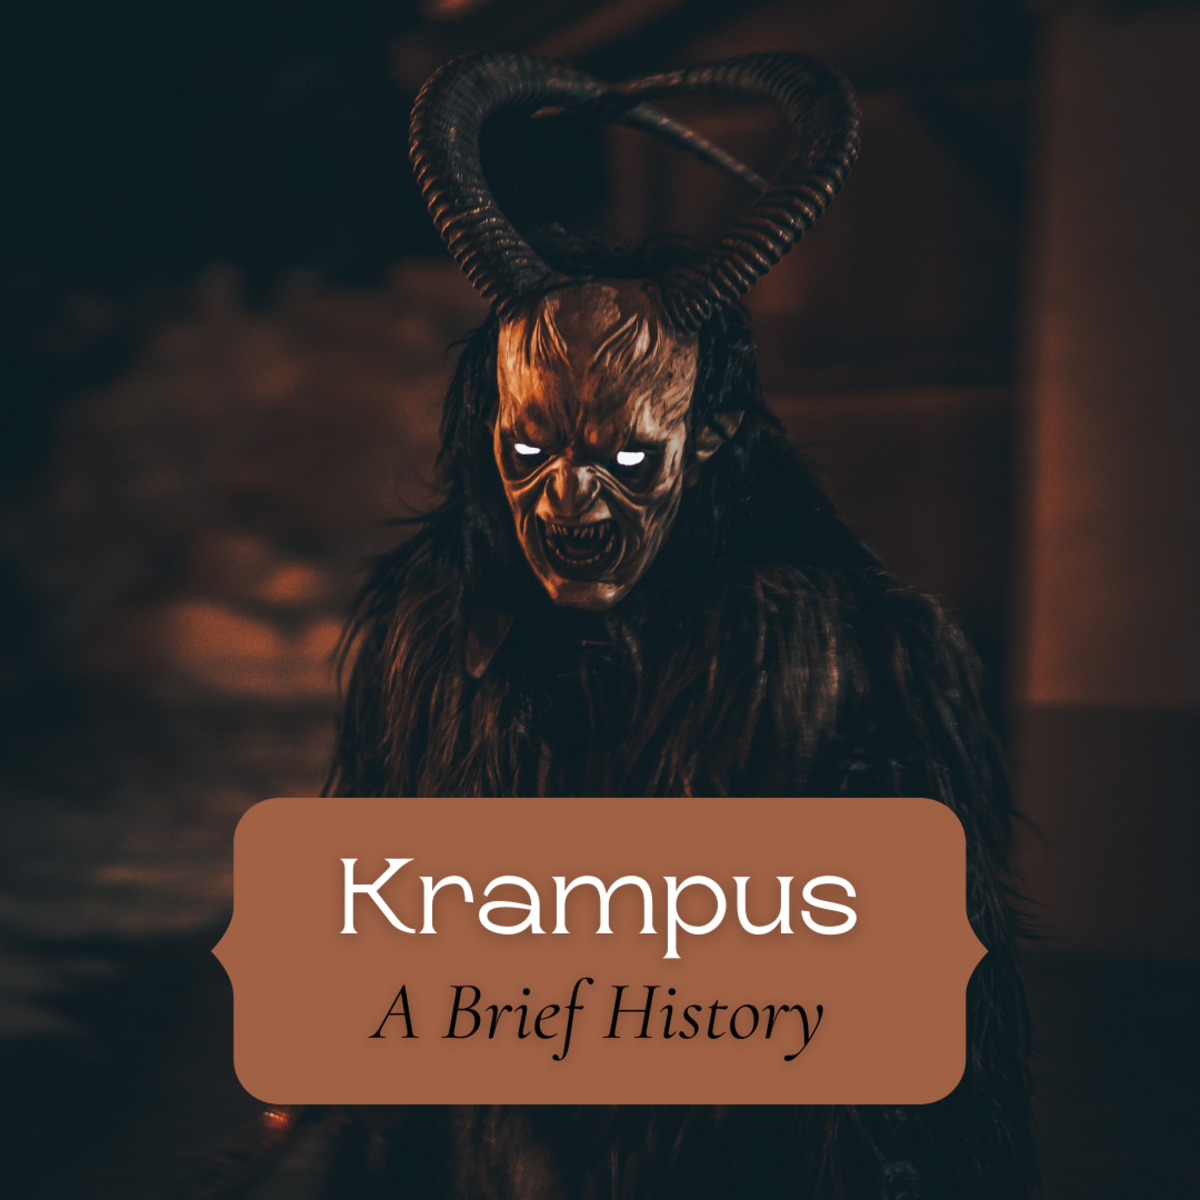 This article will take a look at the history of Krampus in America.